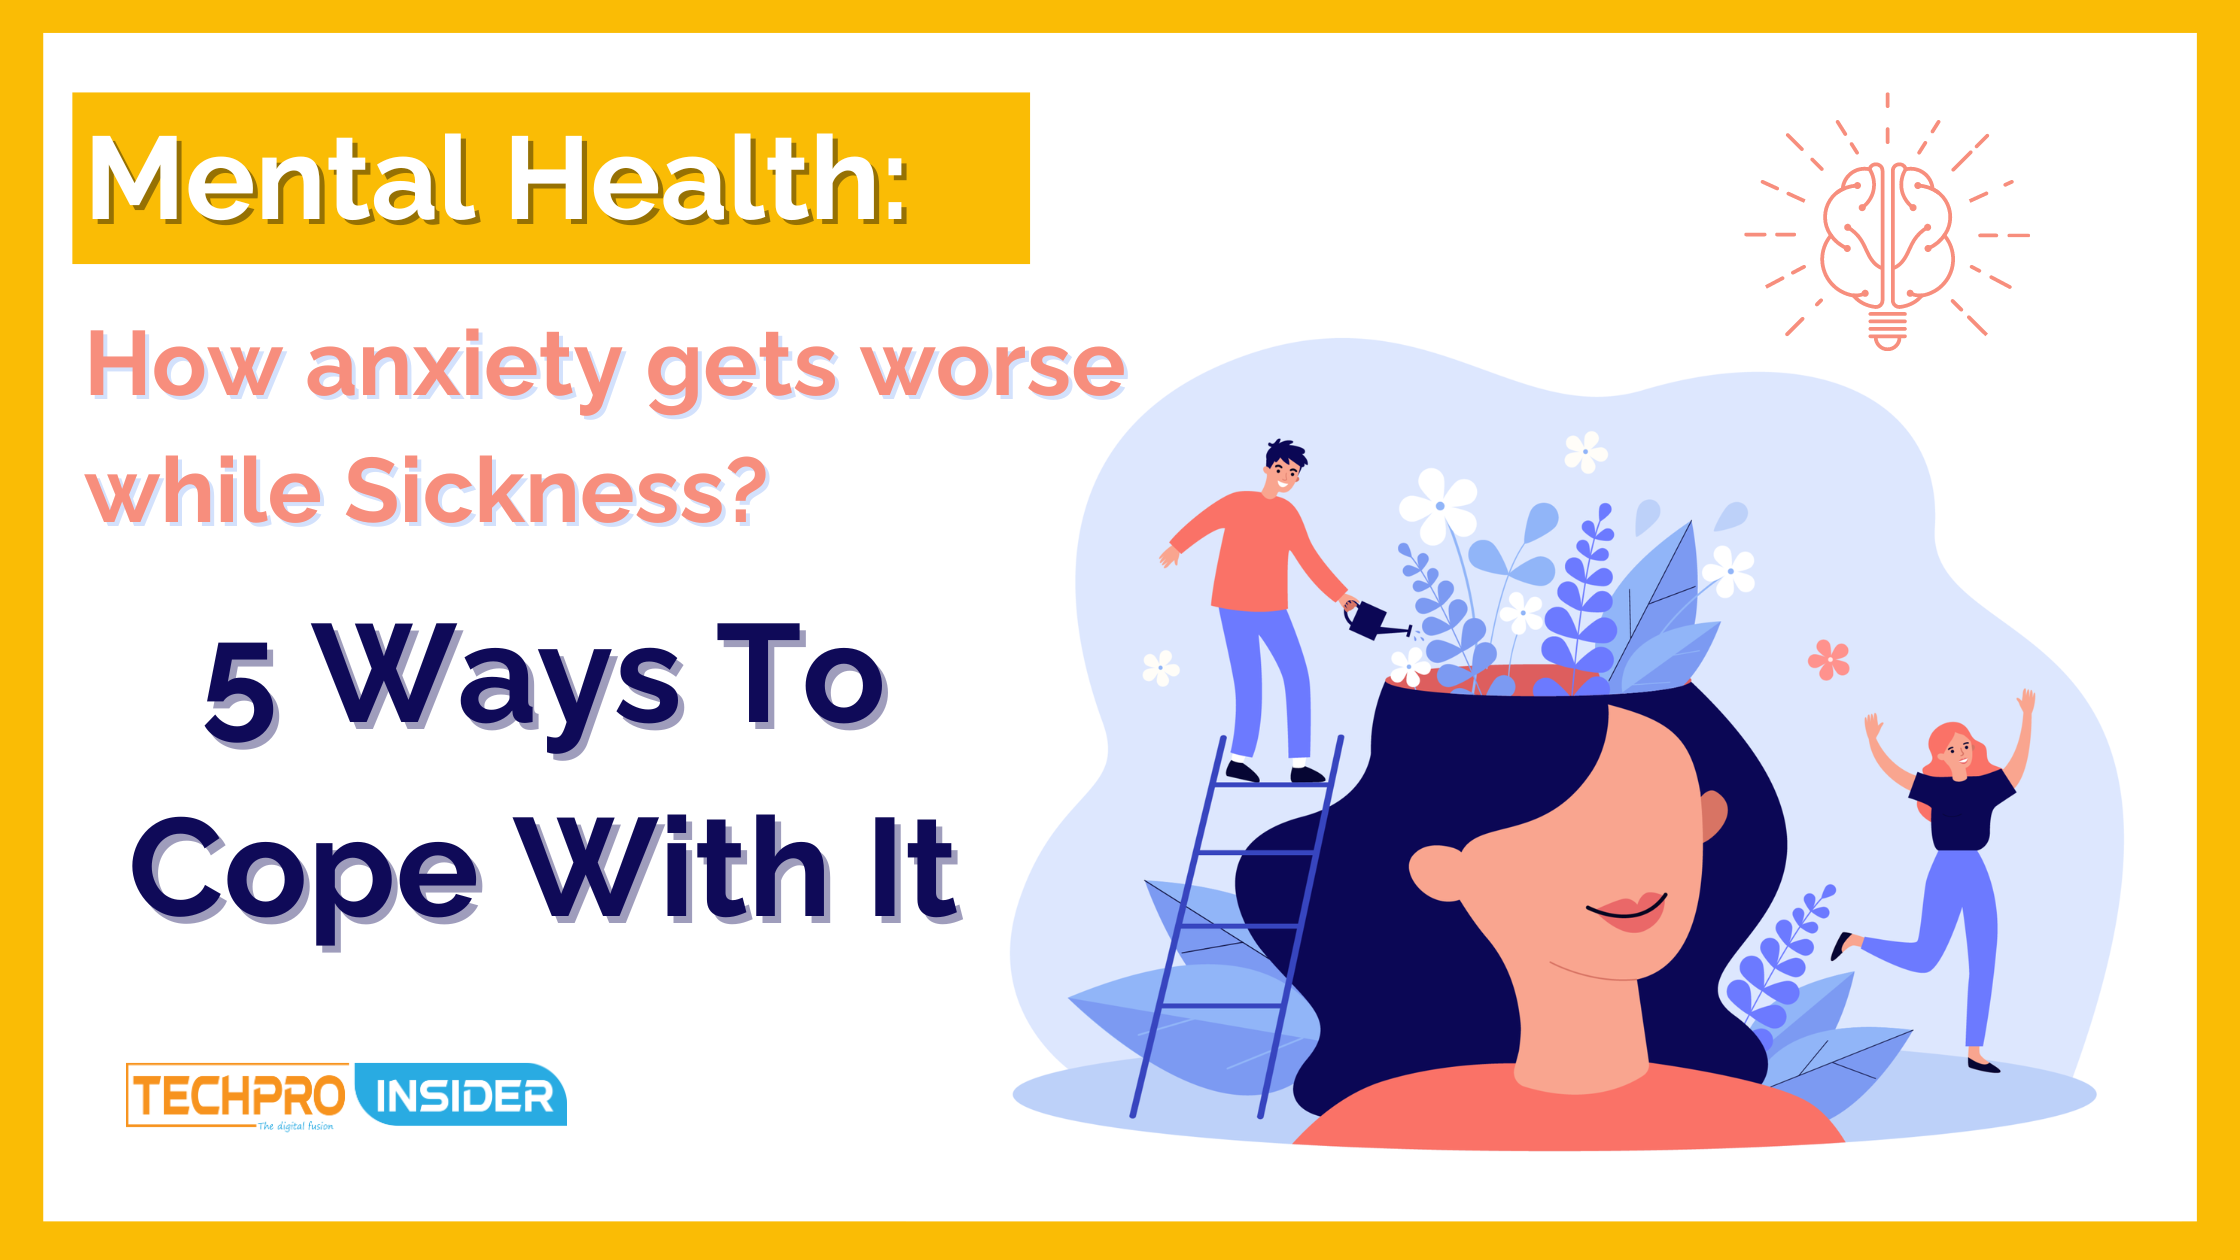 Mental Health: How anxiety gets worse while Sickness? 5 Ways To Cope With It